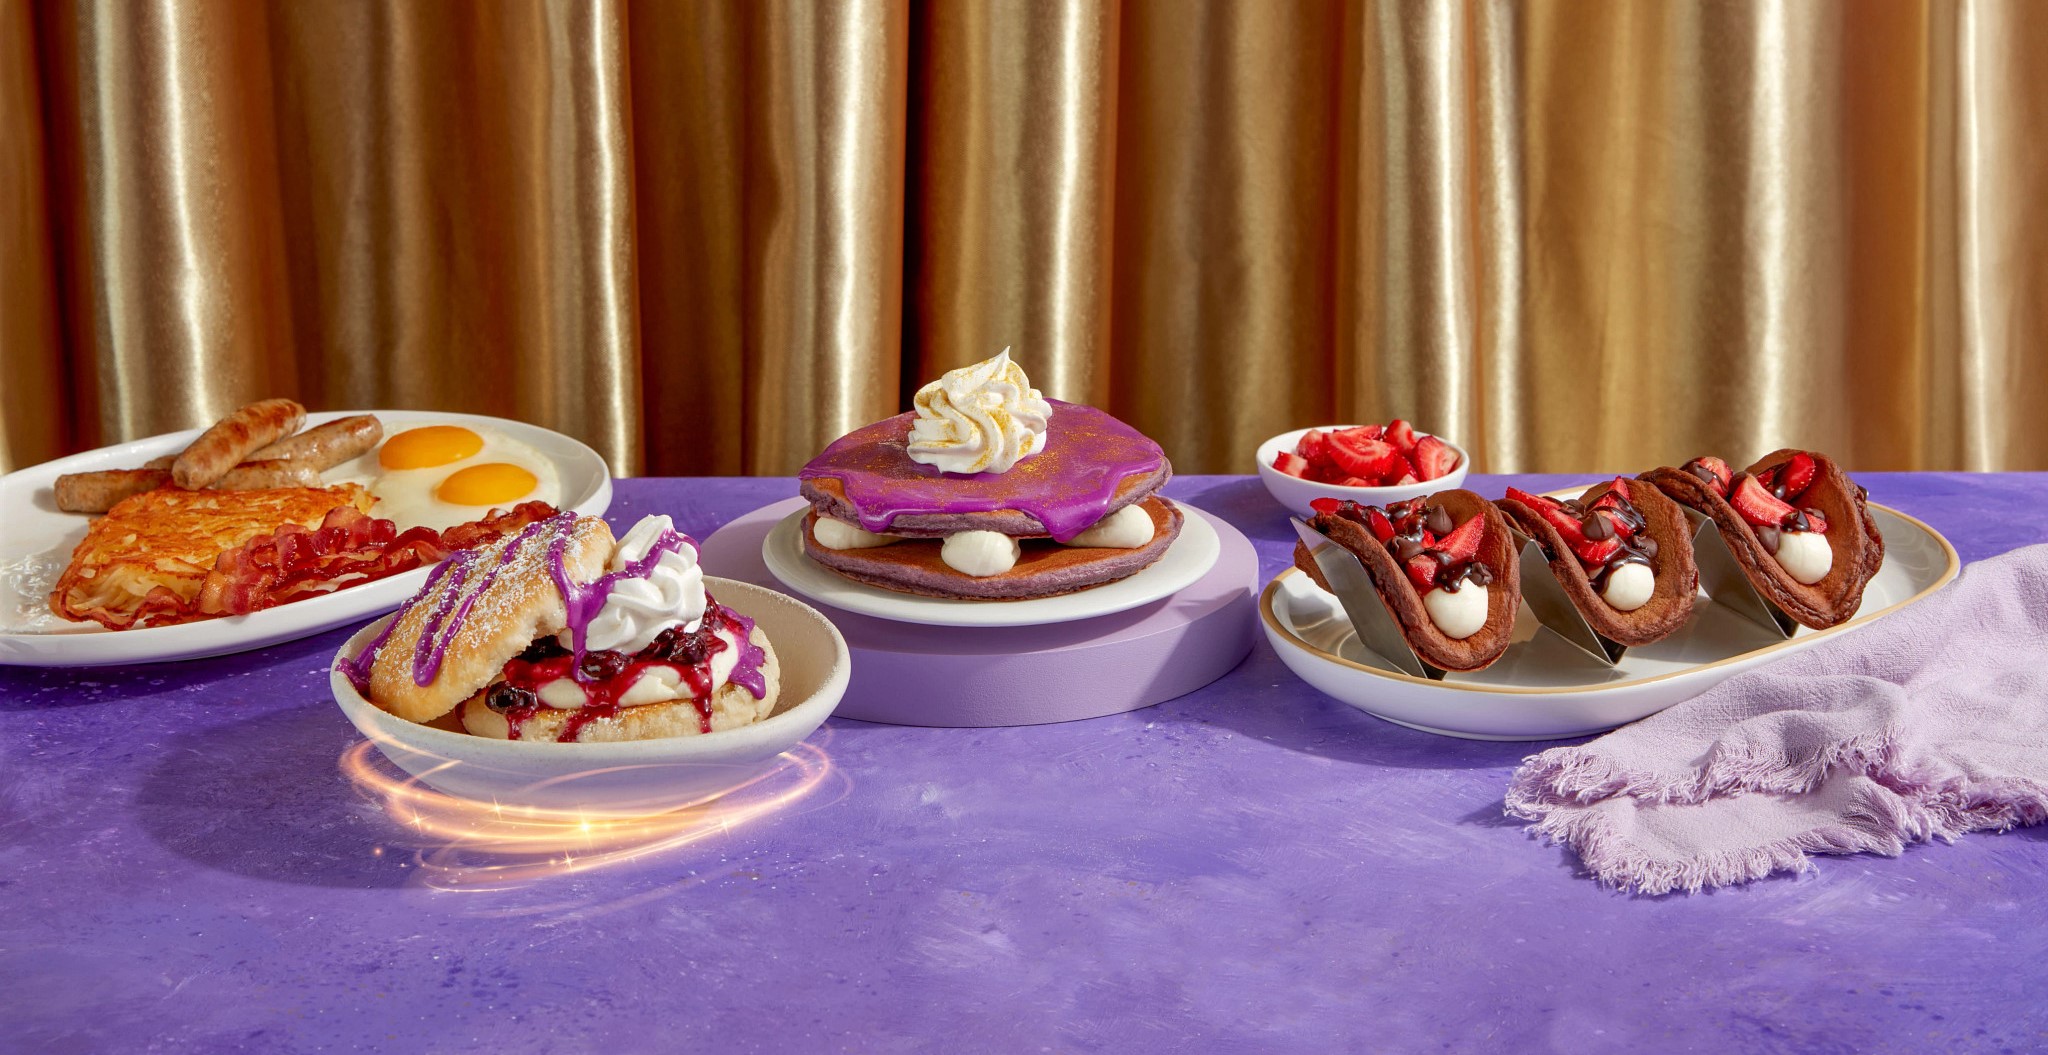 IHOP® Brings a Bit of Whimsy to New Menu in Celebration of the Release of  Warner Bros. Pictures' Holiday Spectacle Wonka